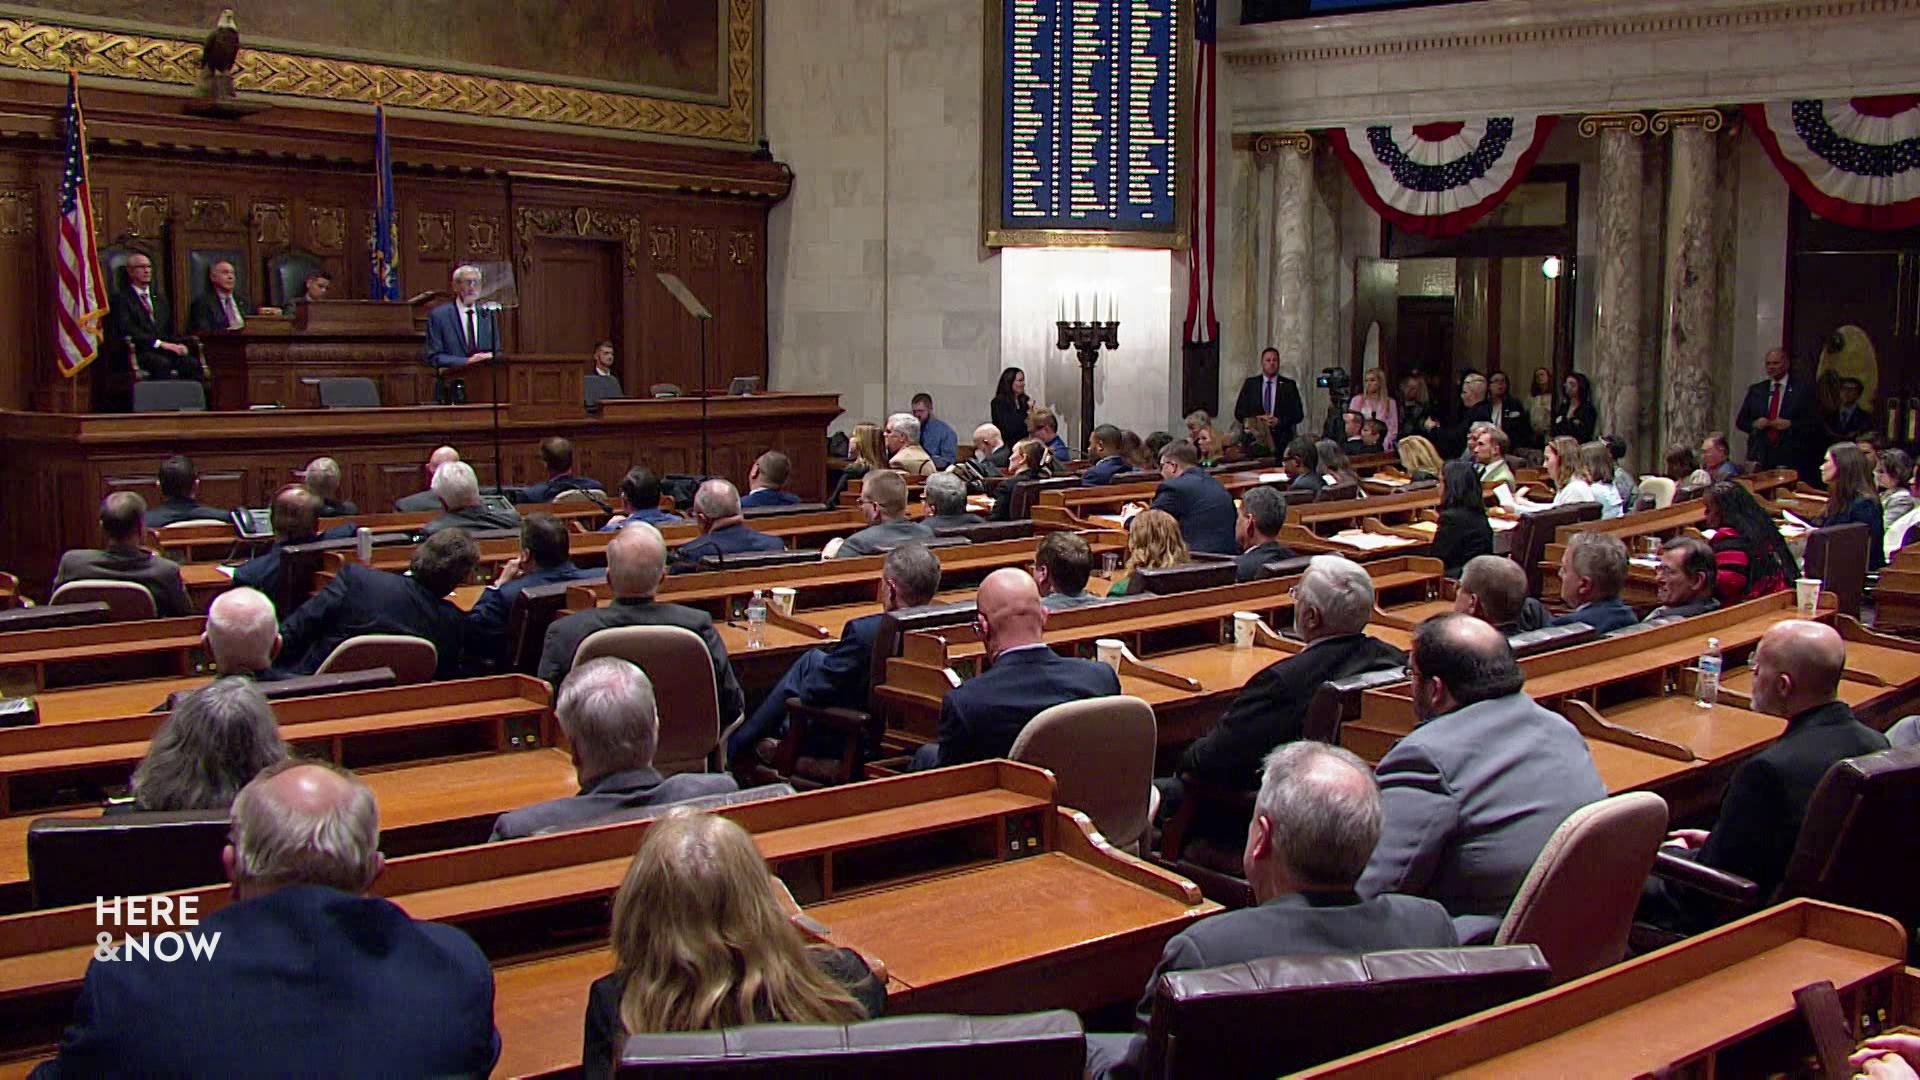 Tony Evers addresses a room full of seated people at podiums during the State of the State.